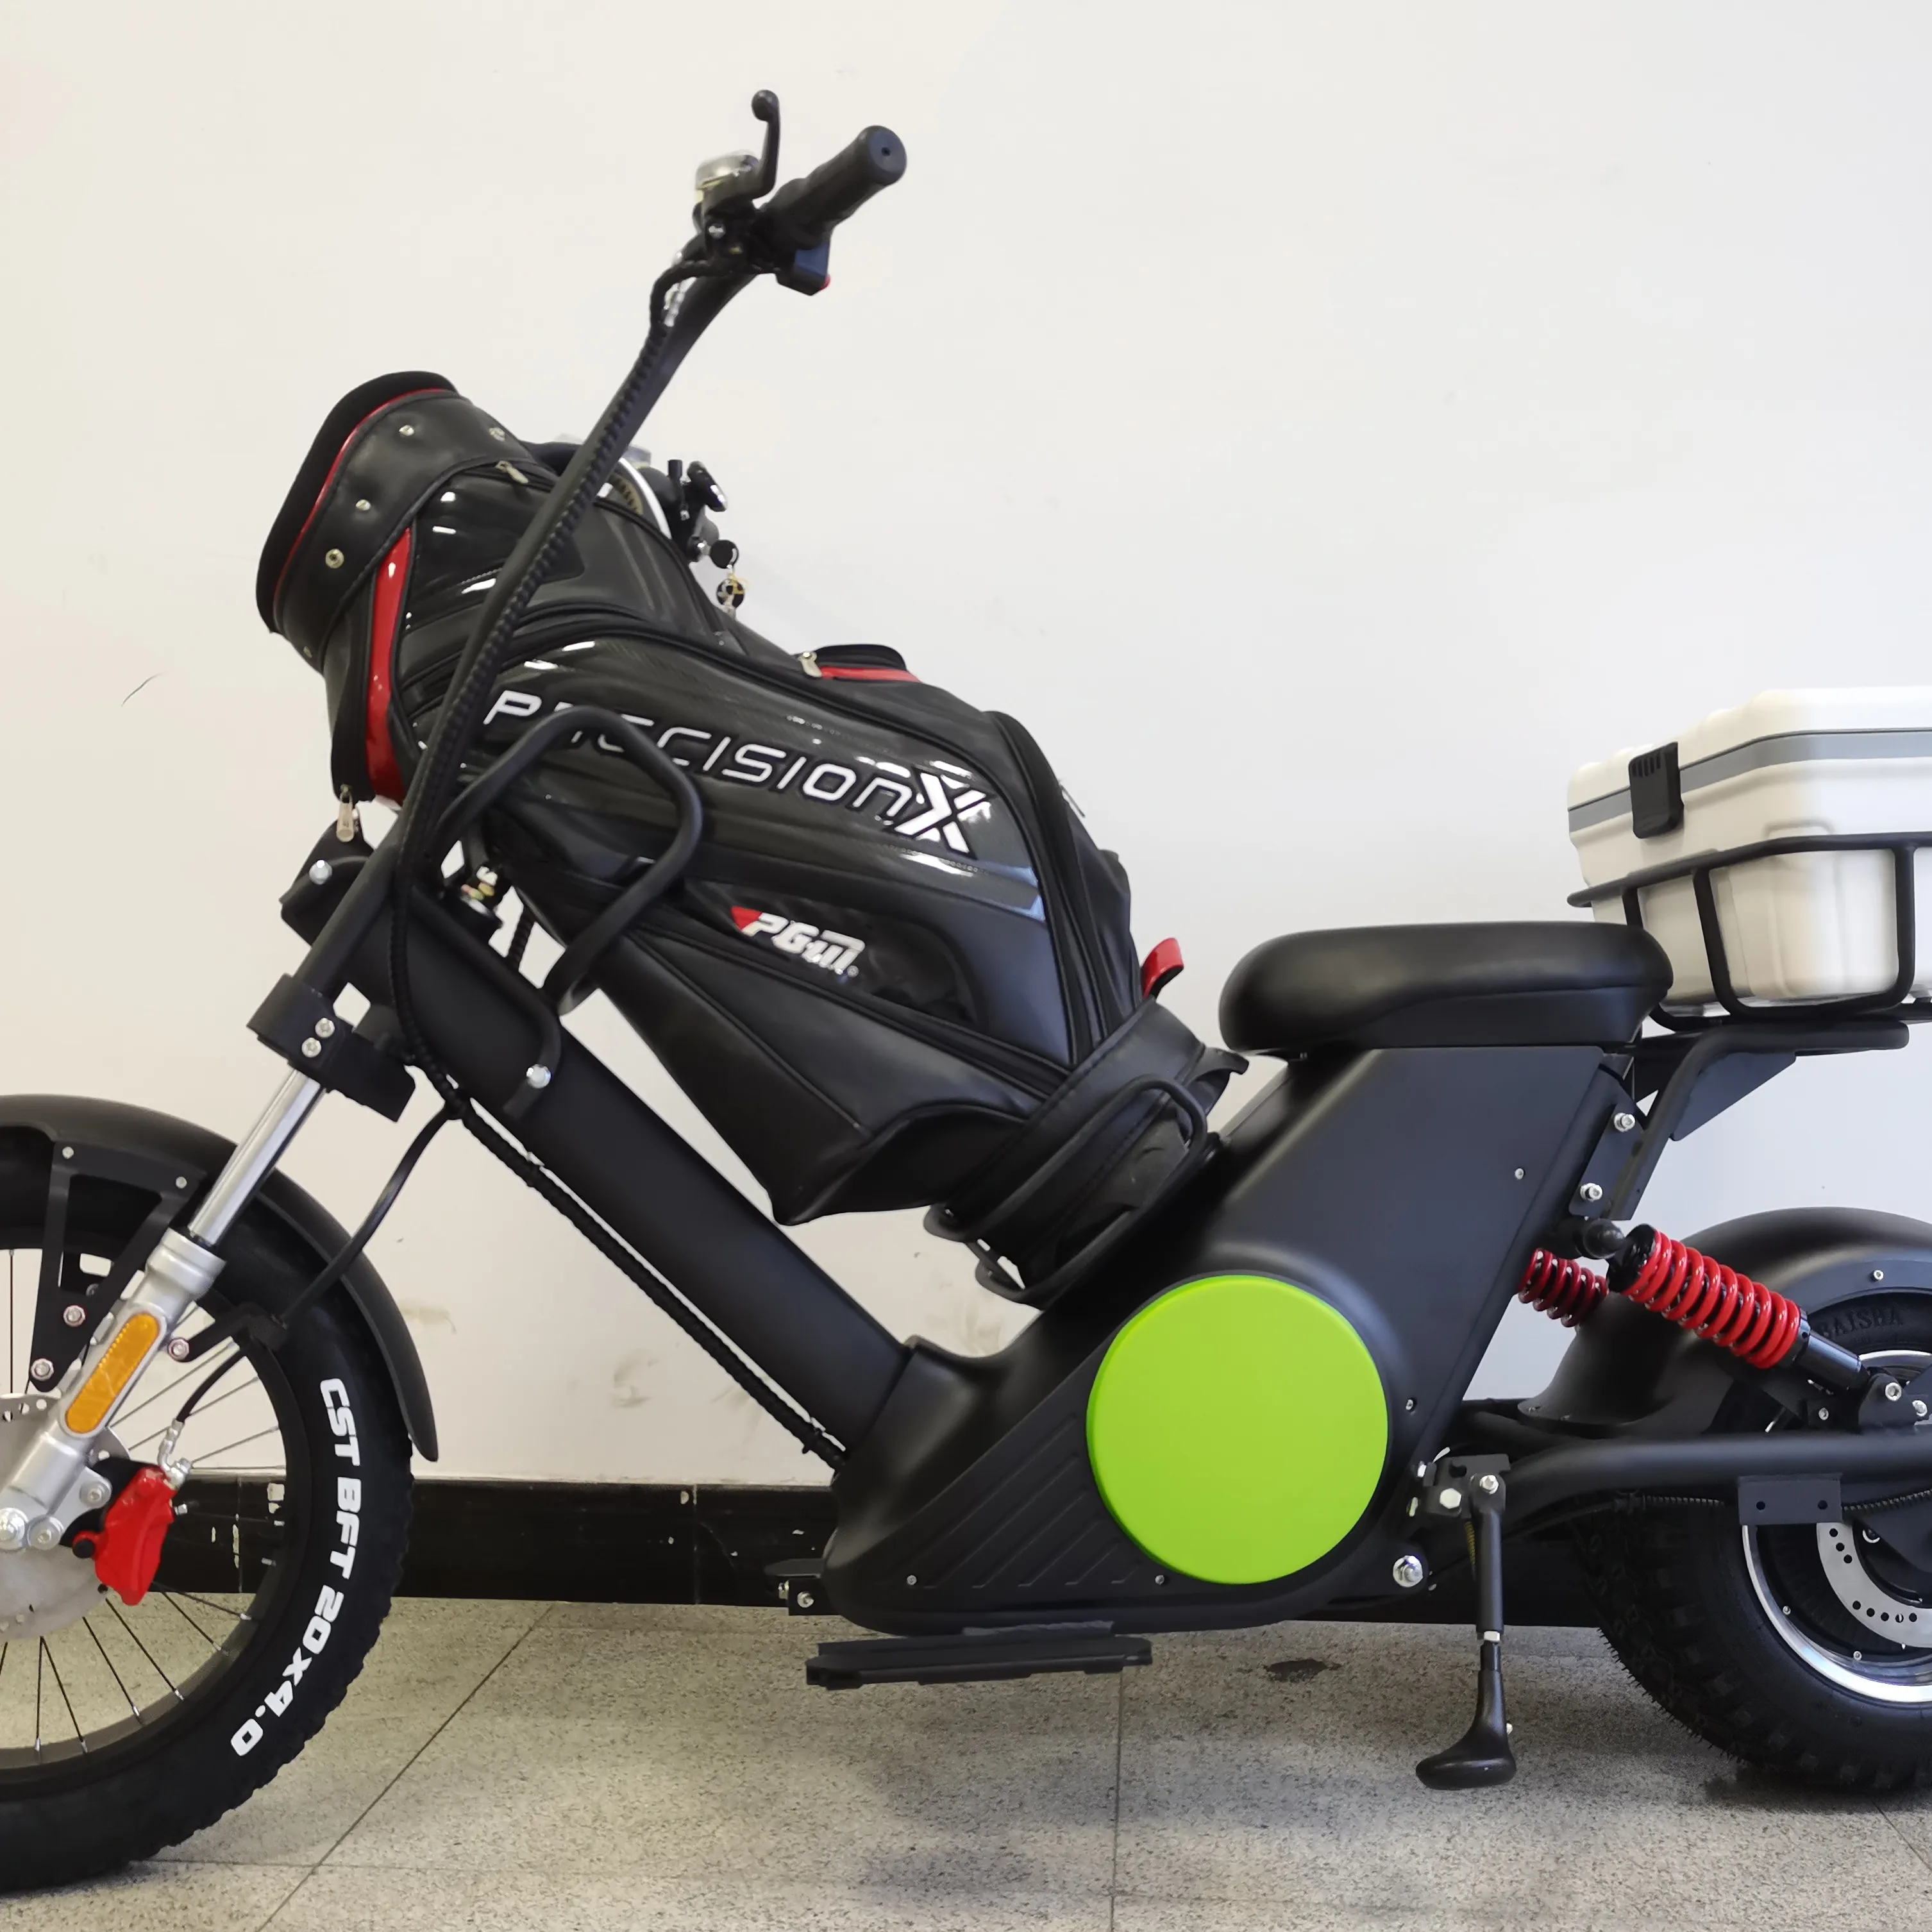 New Design Powerful Golf Scooter Golf Cart Citycoco Electric Scooter with Cooler Box used in Golf Course